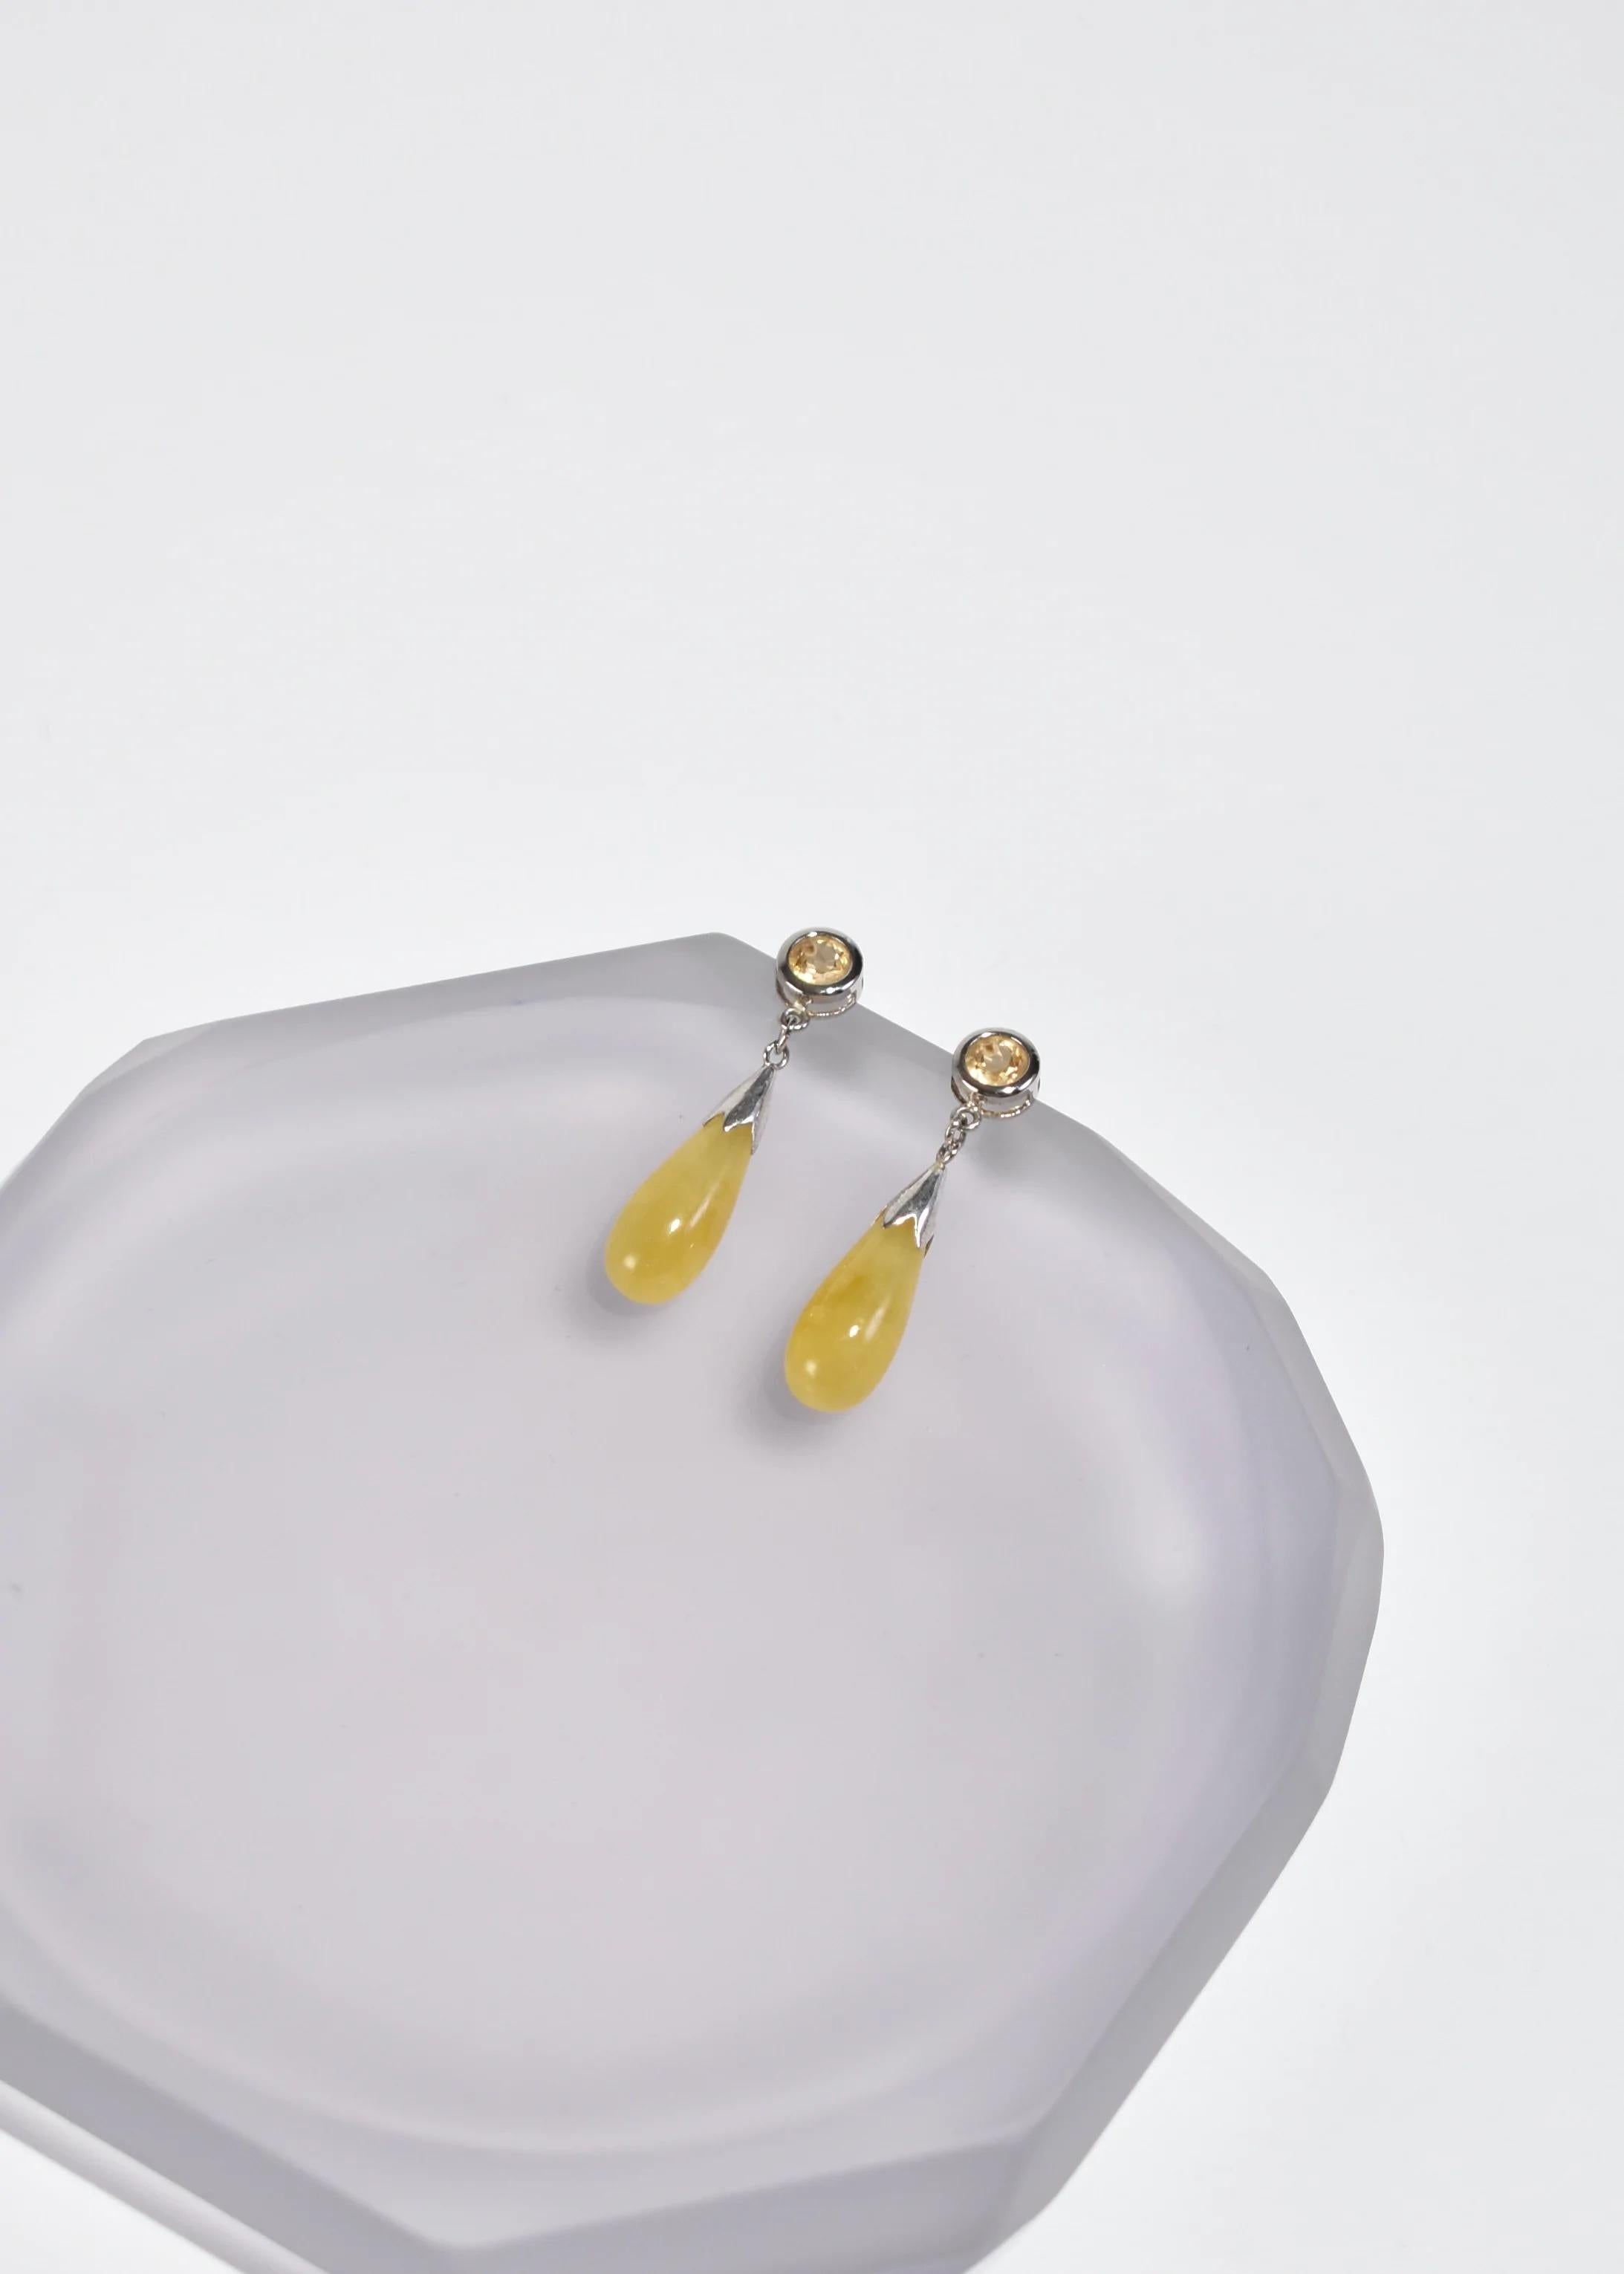 Beautiful sterling earrings with faceted citrine stones and yellow jade drop detail, pierced.

Material: Sterling silver, citrine, jade.